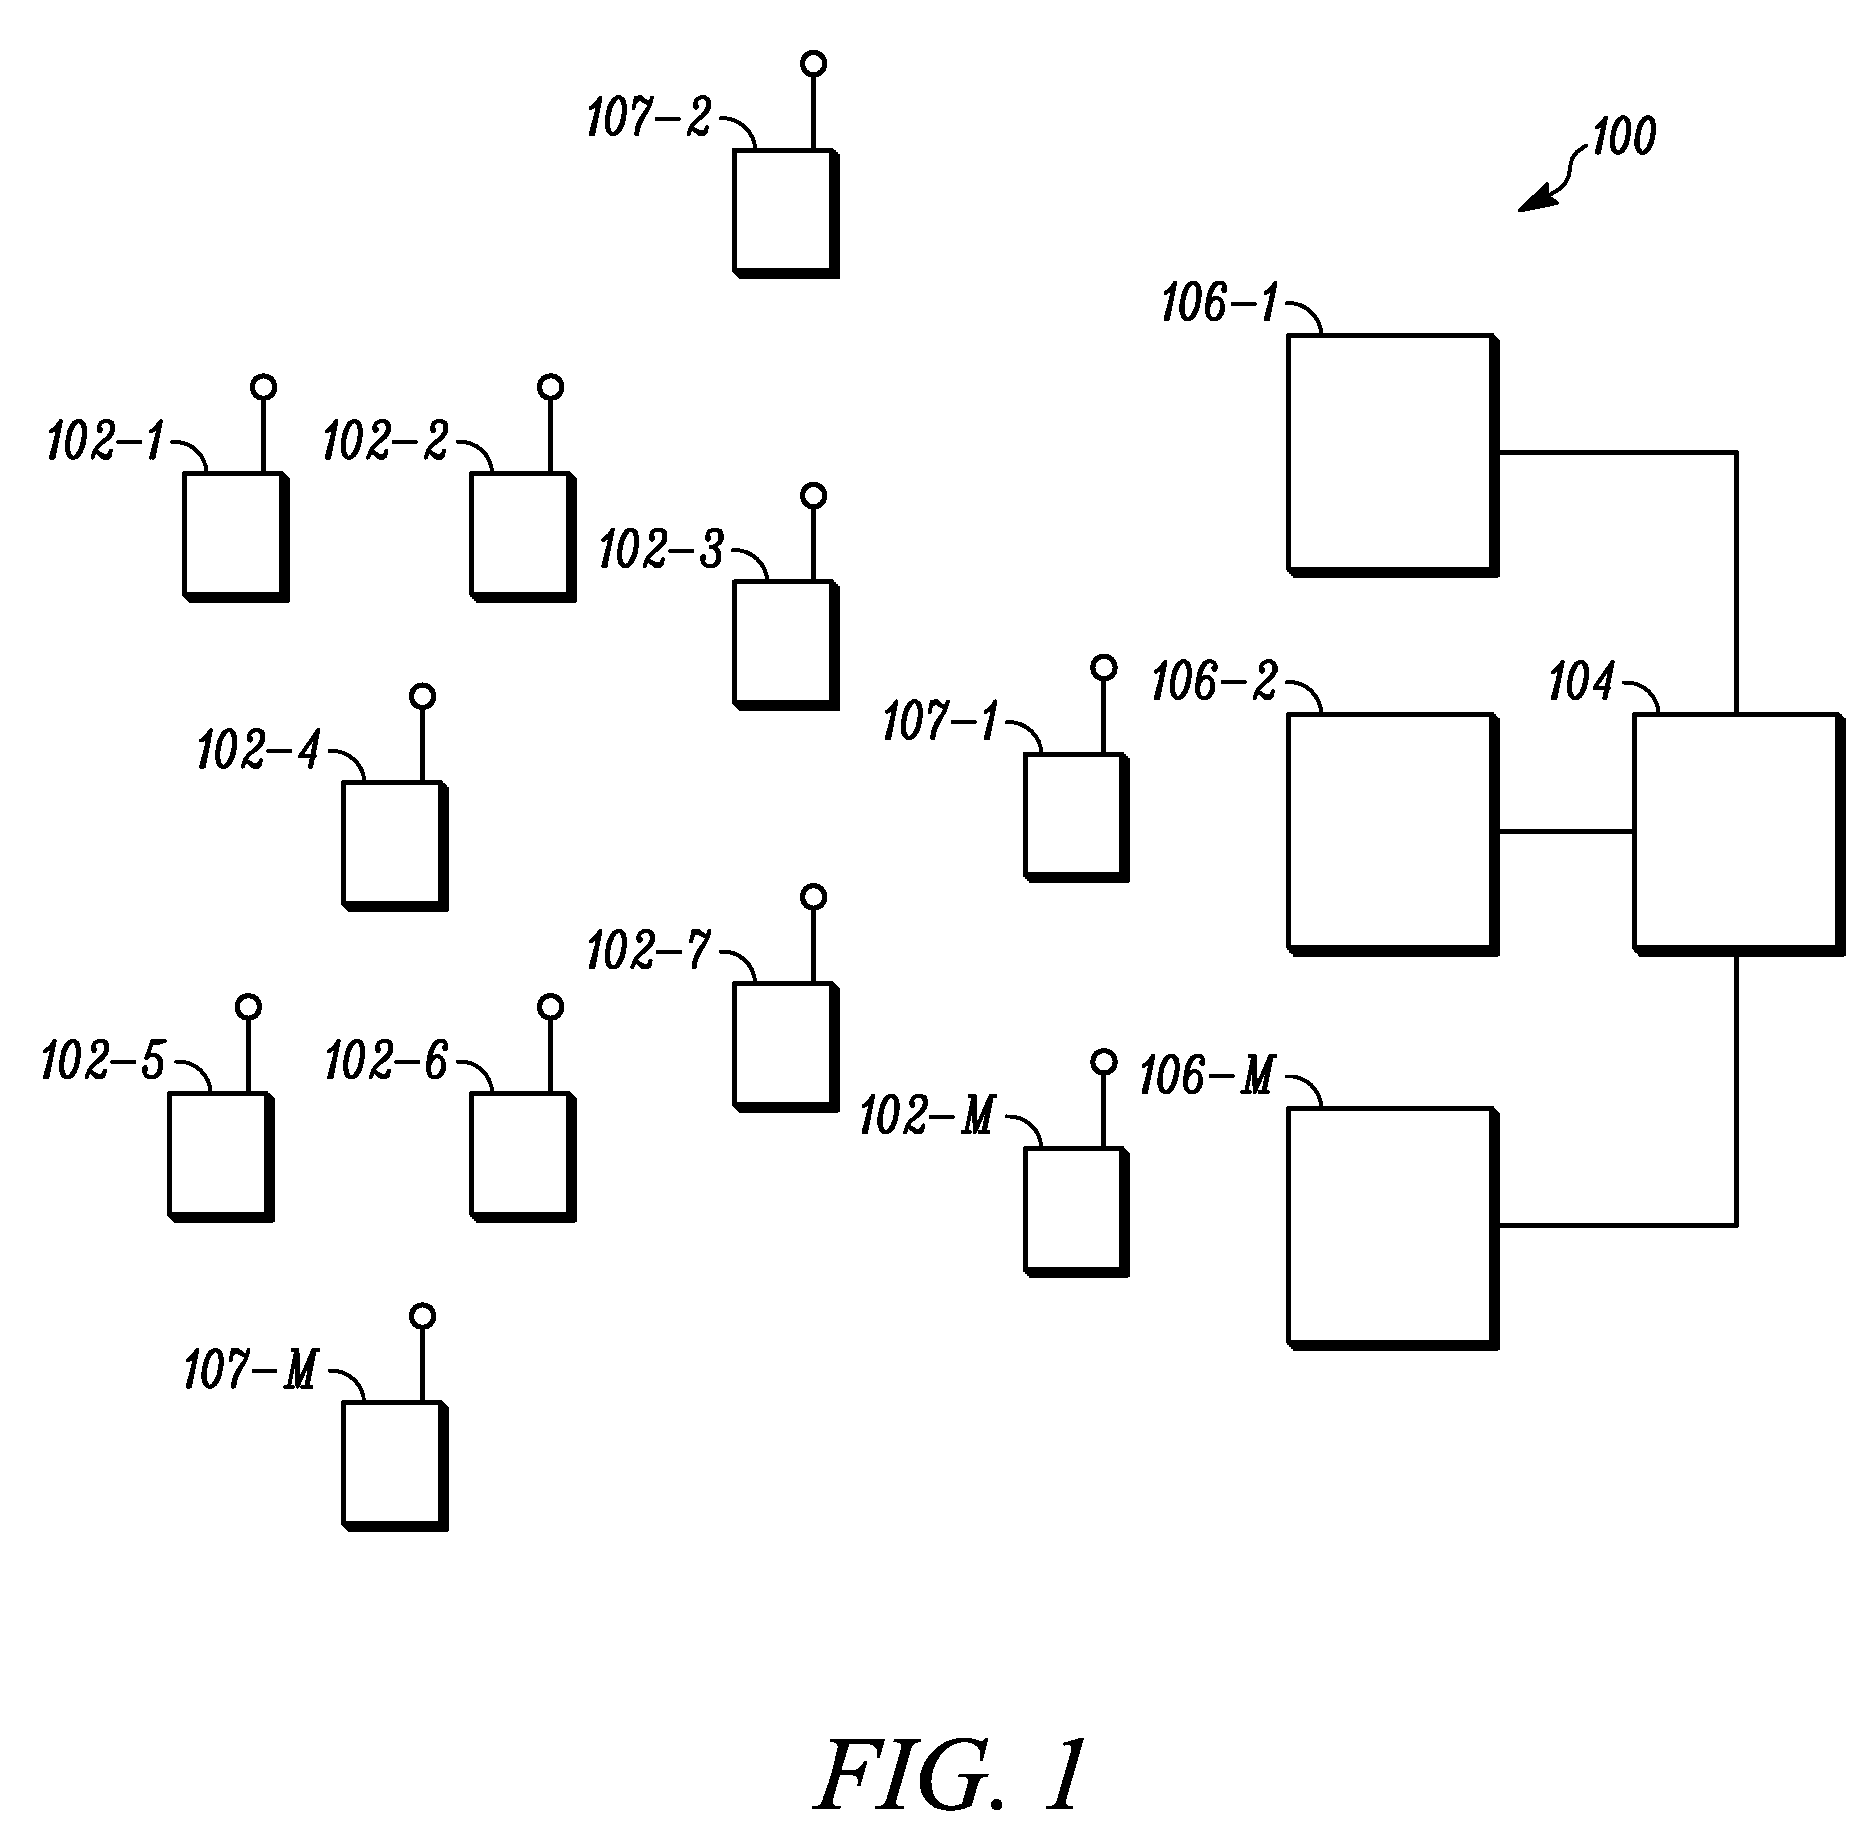 System and method for computing the signal propagation time and the clock correction for mobile stations in a wireless network